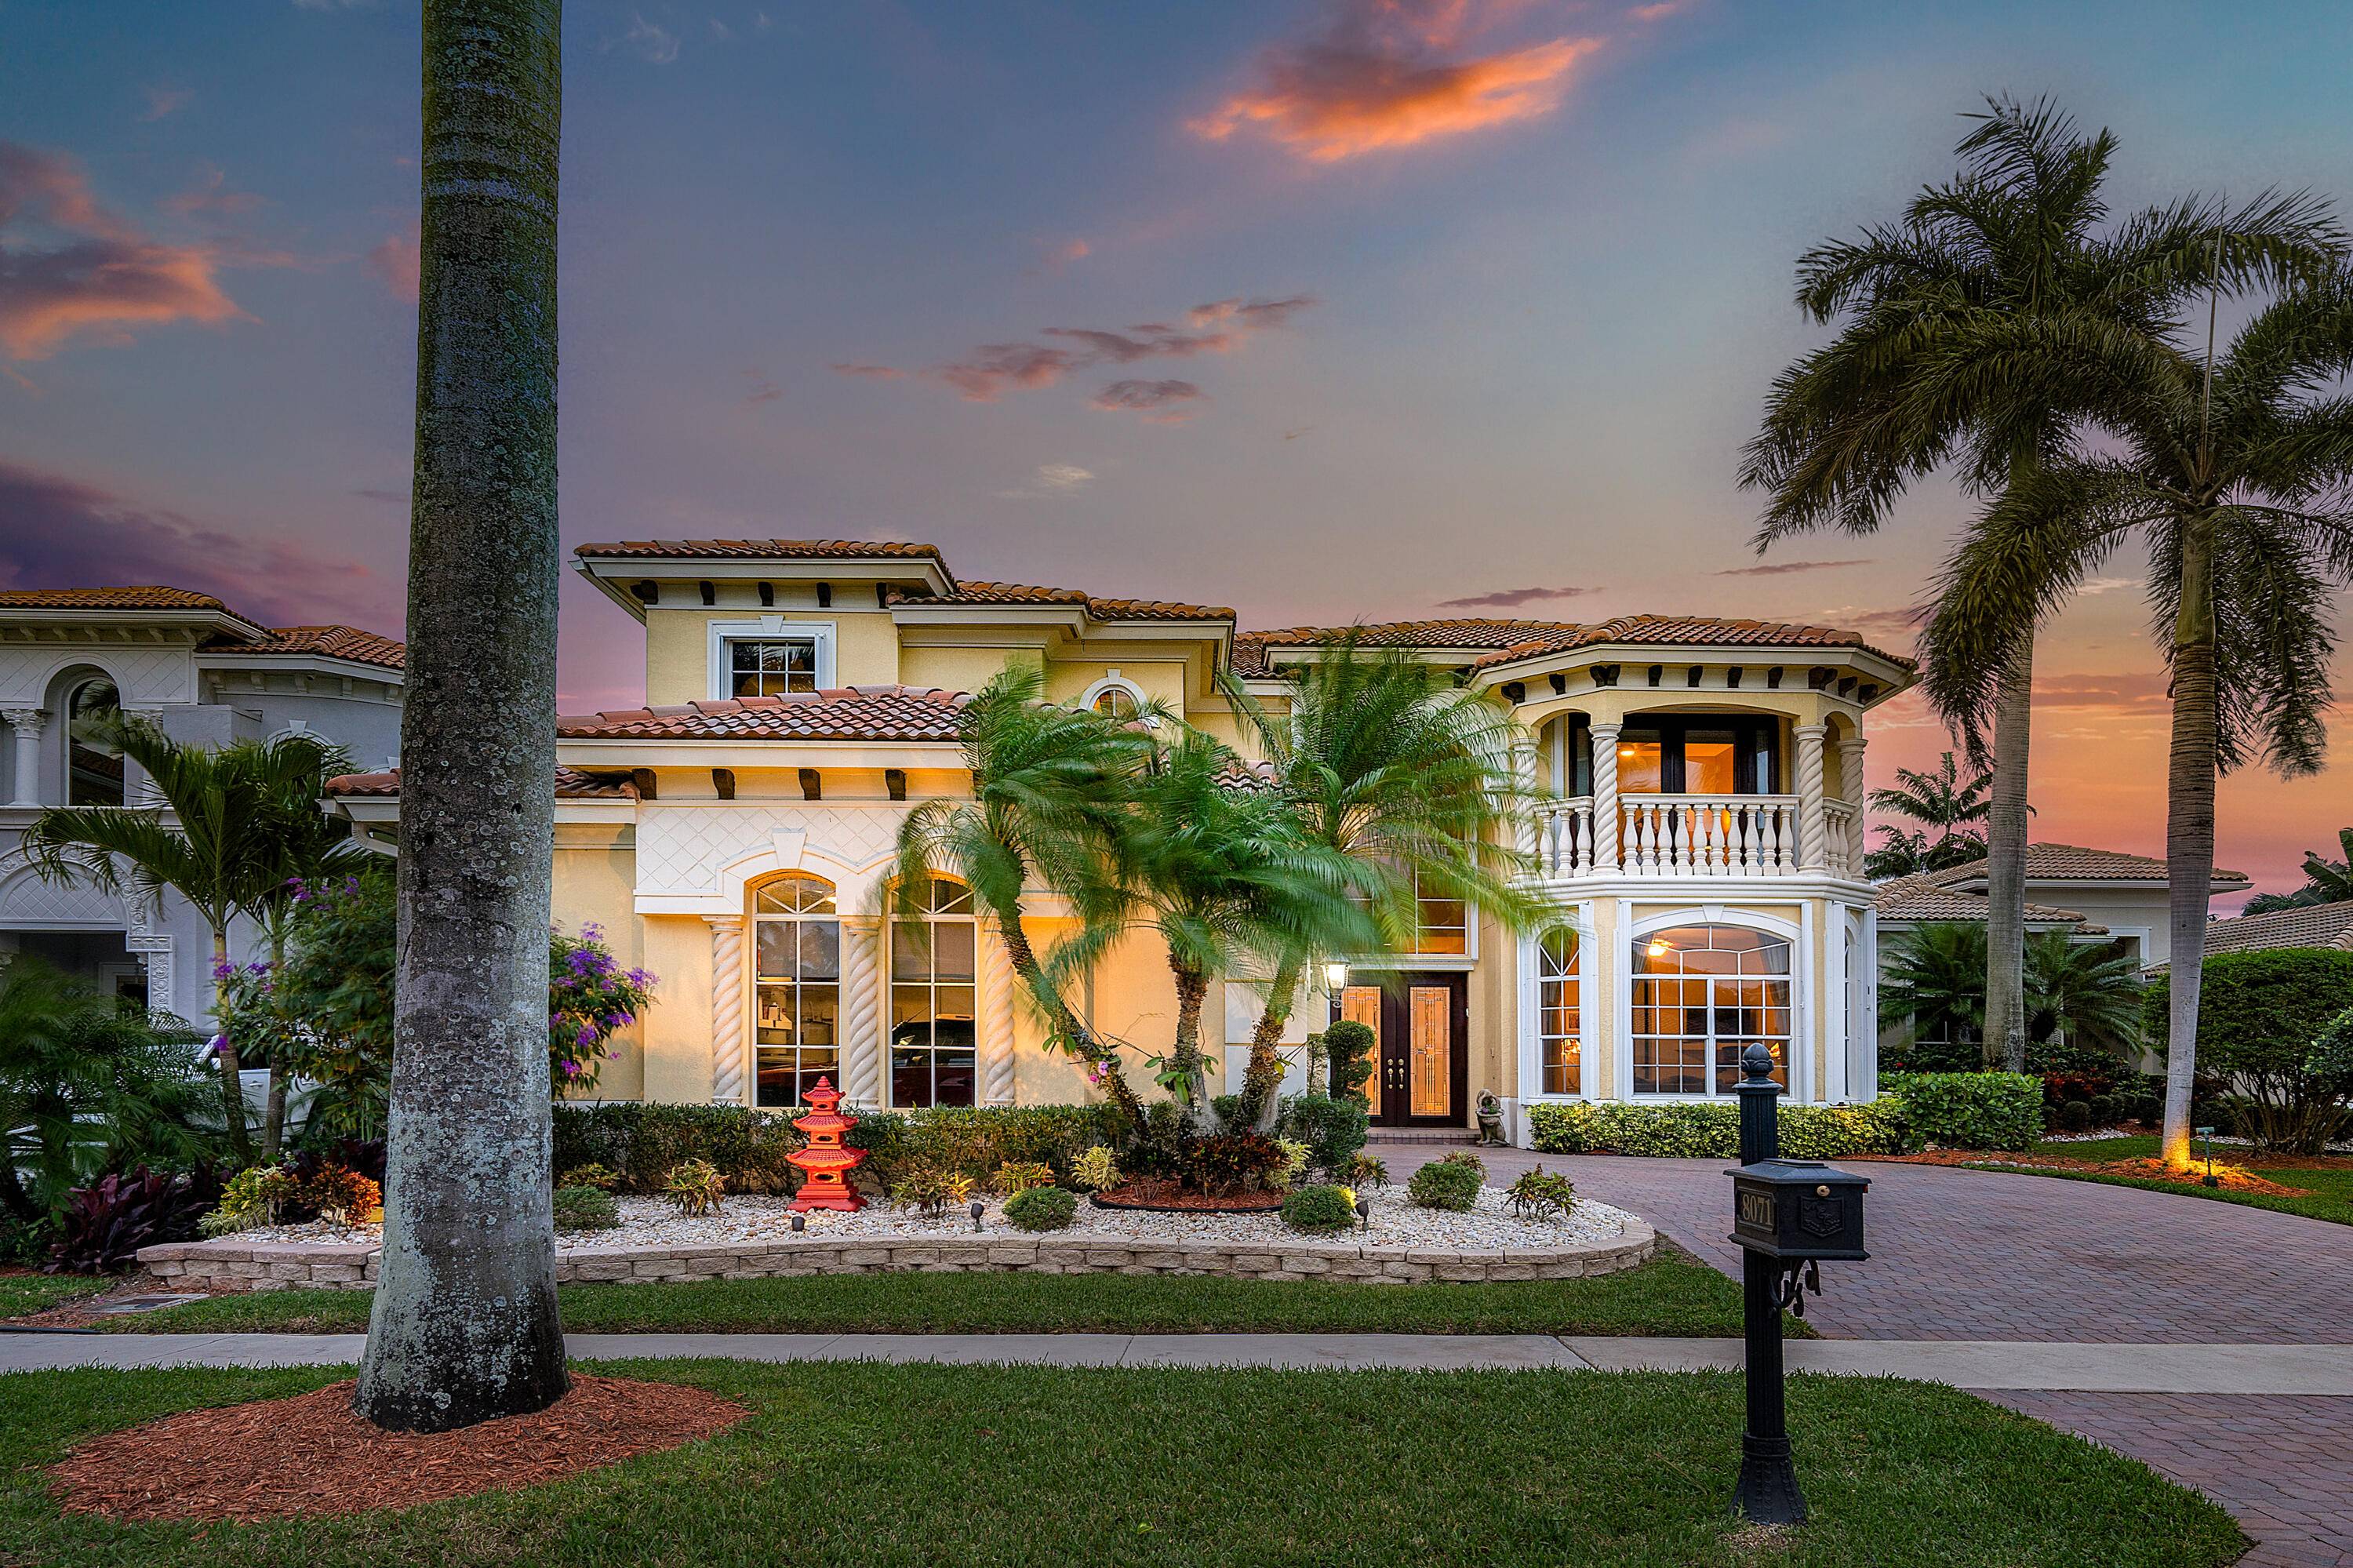 Elegant 4 bedroom, 5. 1 bath home nestled on the picturesque Mizner Country Club golf course.